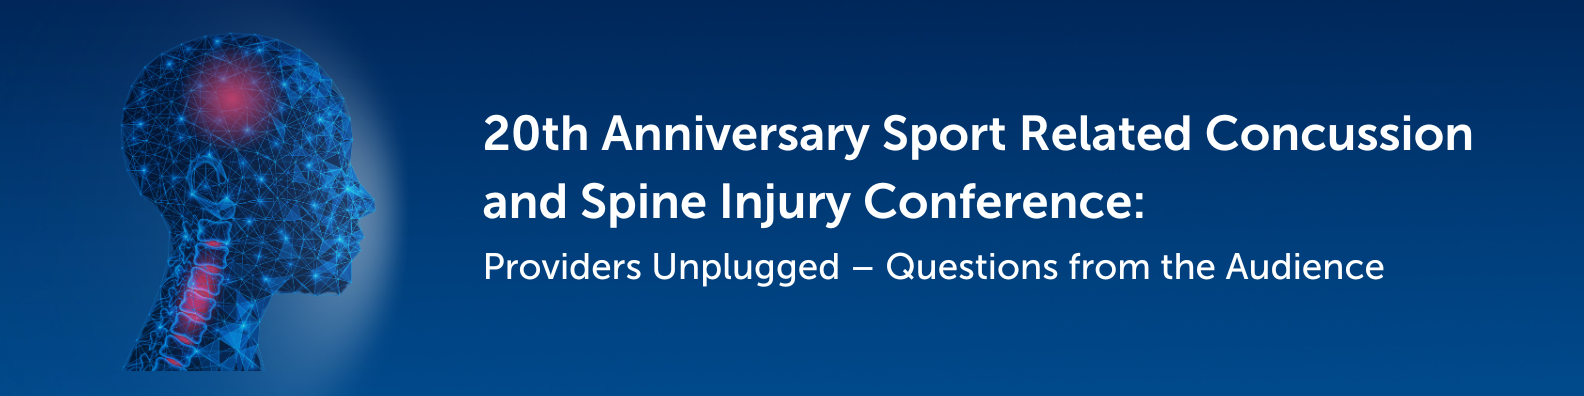 20th Anniversary Sport Related Concussion and Spine Injury Conference: Providers Unplugged – Questions from the Audience Banner